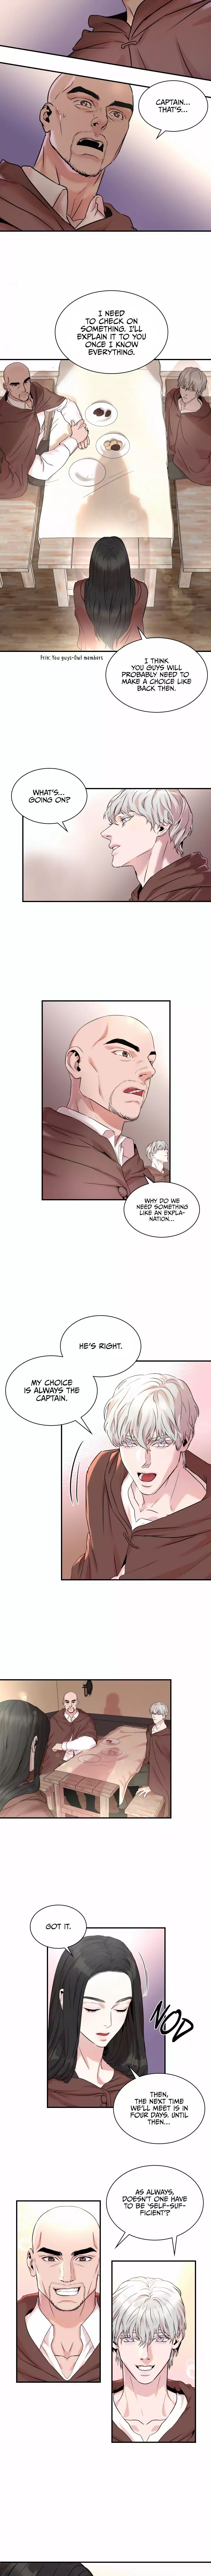 Aideen - Chapter 8 Page 8